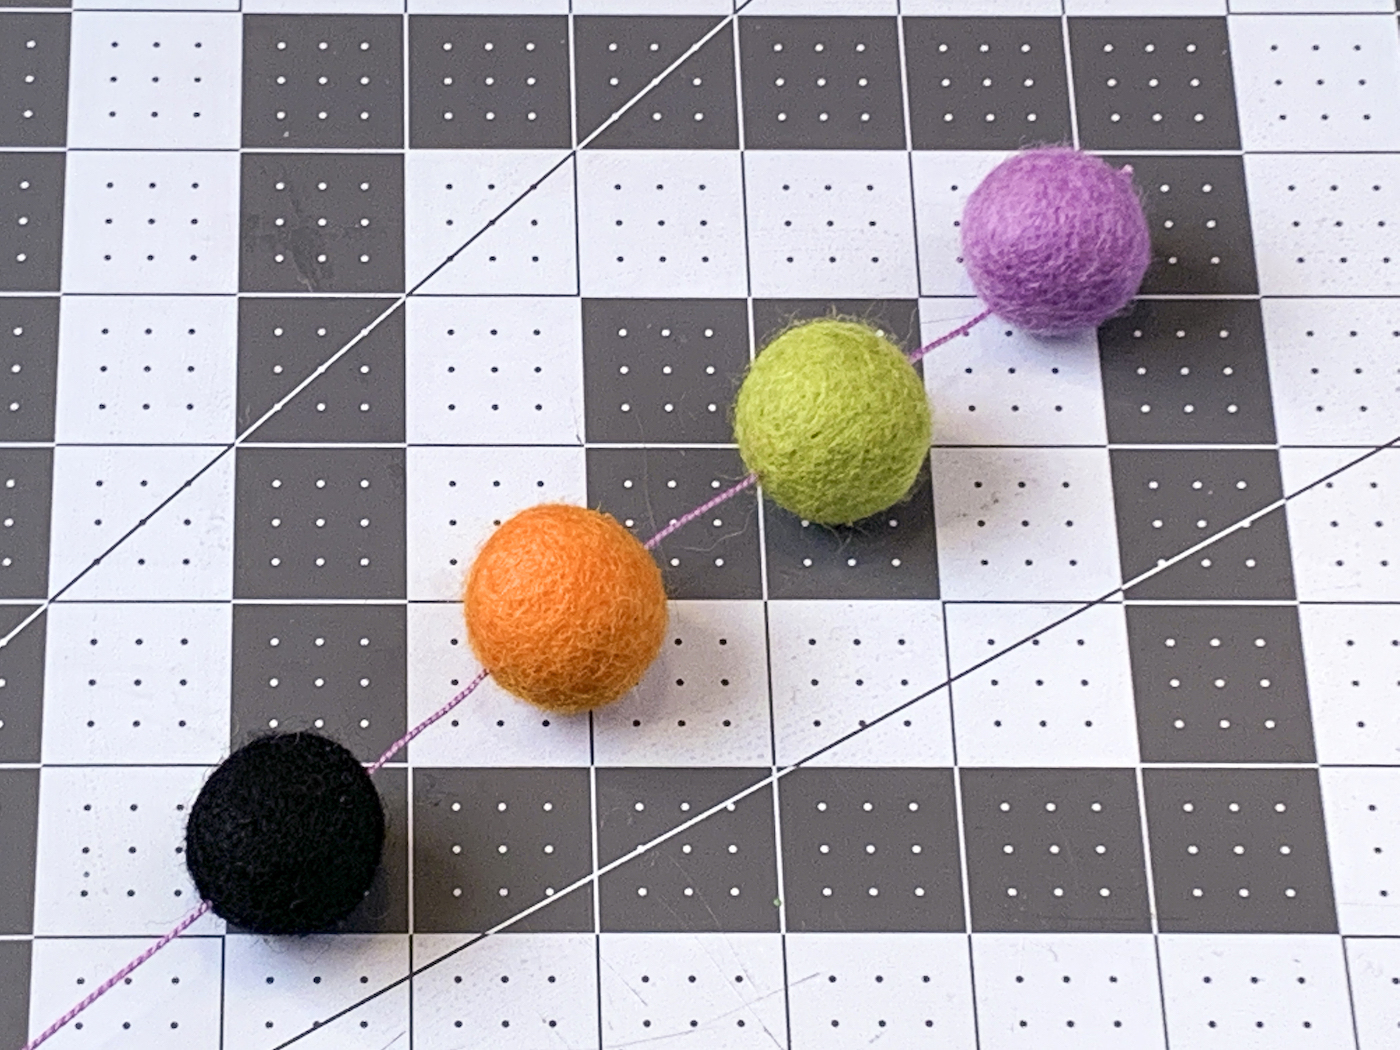 Spacing out the Halloween felt balls on the embroidery floss